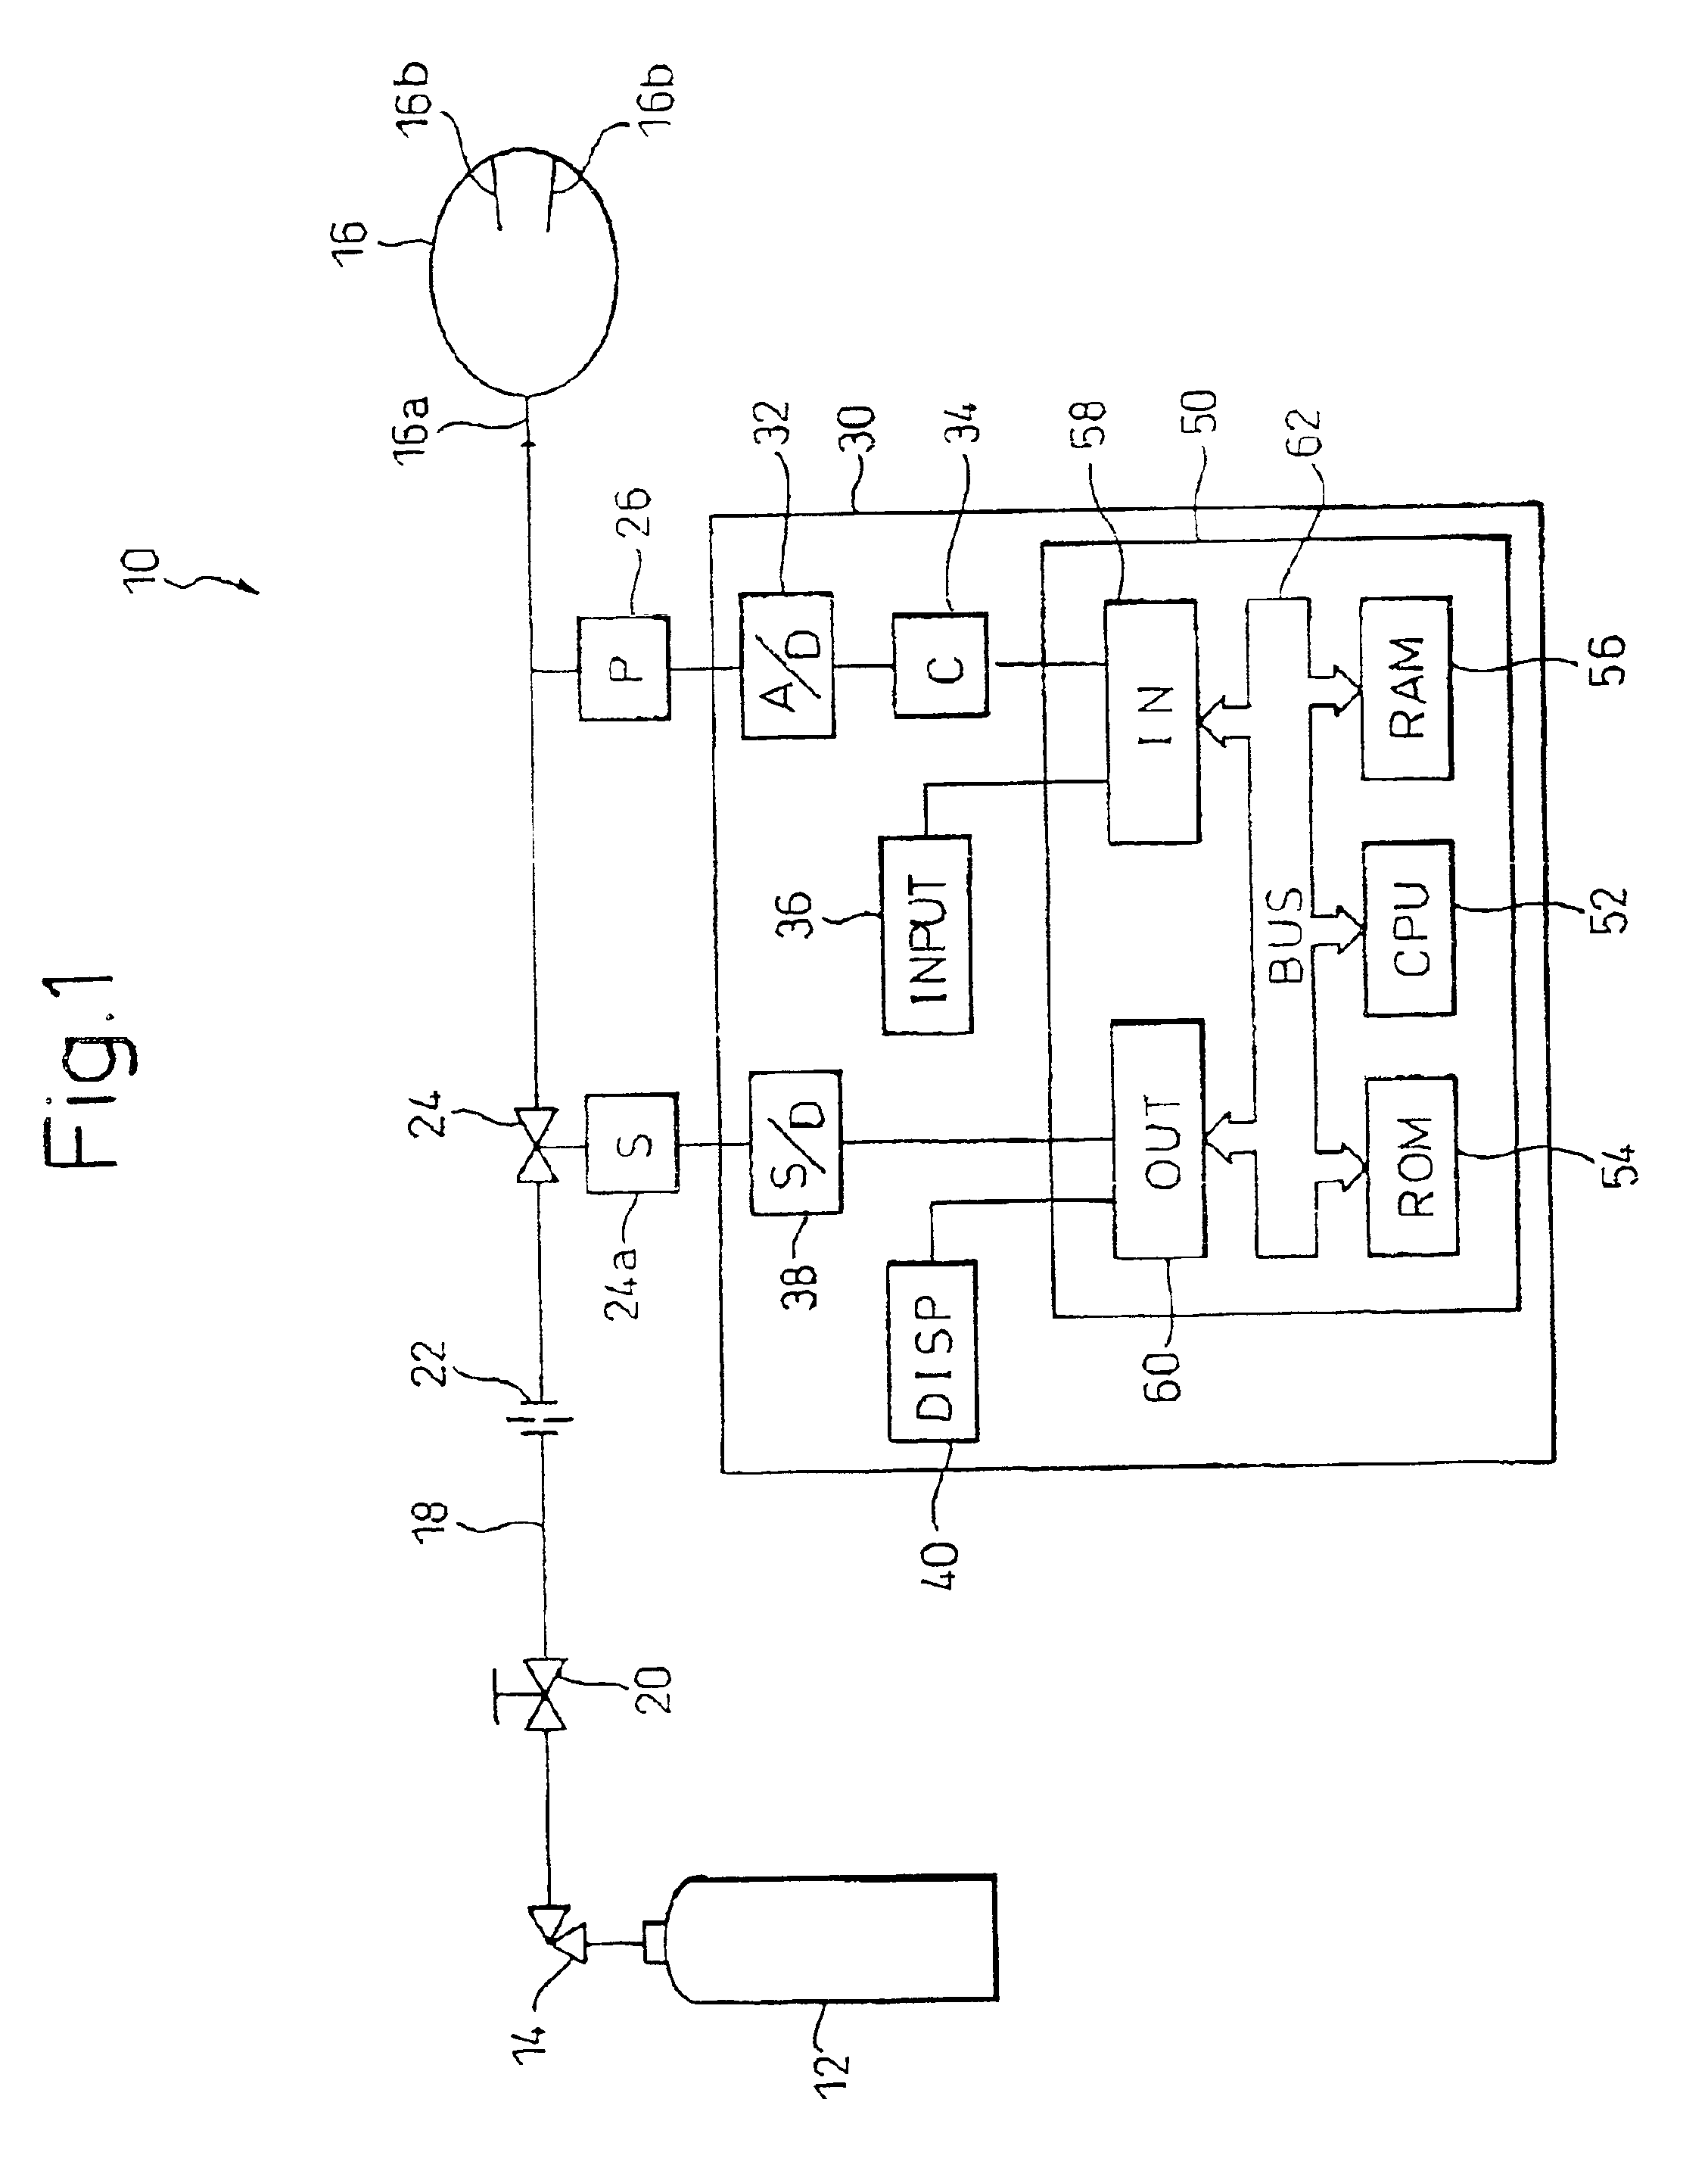 Apparatus for supplying a therapeutic oxygen gas